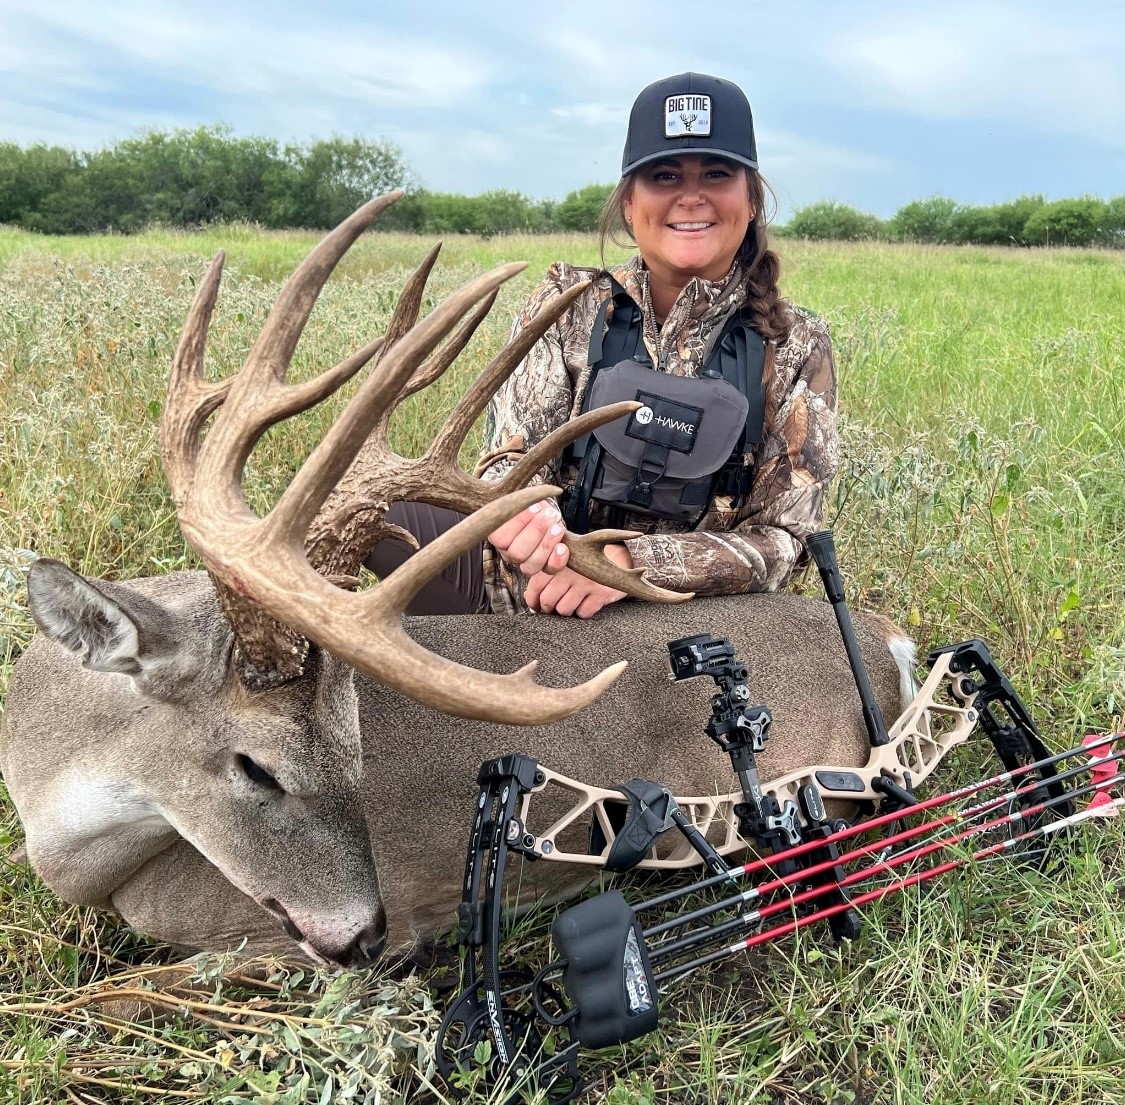 Check out this monster buck that our good friend Bonnie McFerrin from The Legends of the Fall downed during opening week in Texas. A free-range bowhunting GIANT at 195 2/8' from Kleberg County. Way to go Bonnie!! #hunting #FindYourAdventure #ITSINOURBLOOD #deer #Texas #bigbuck